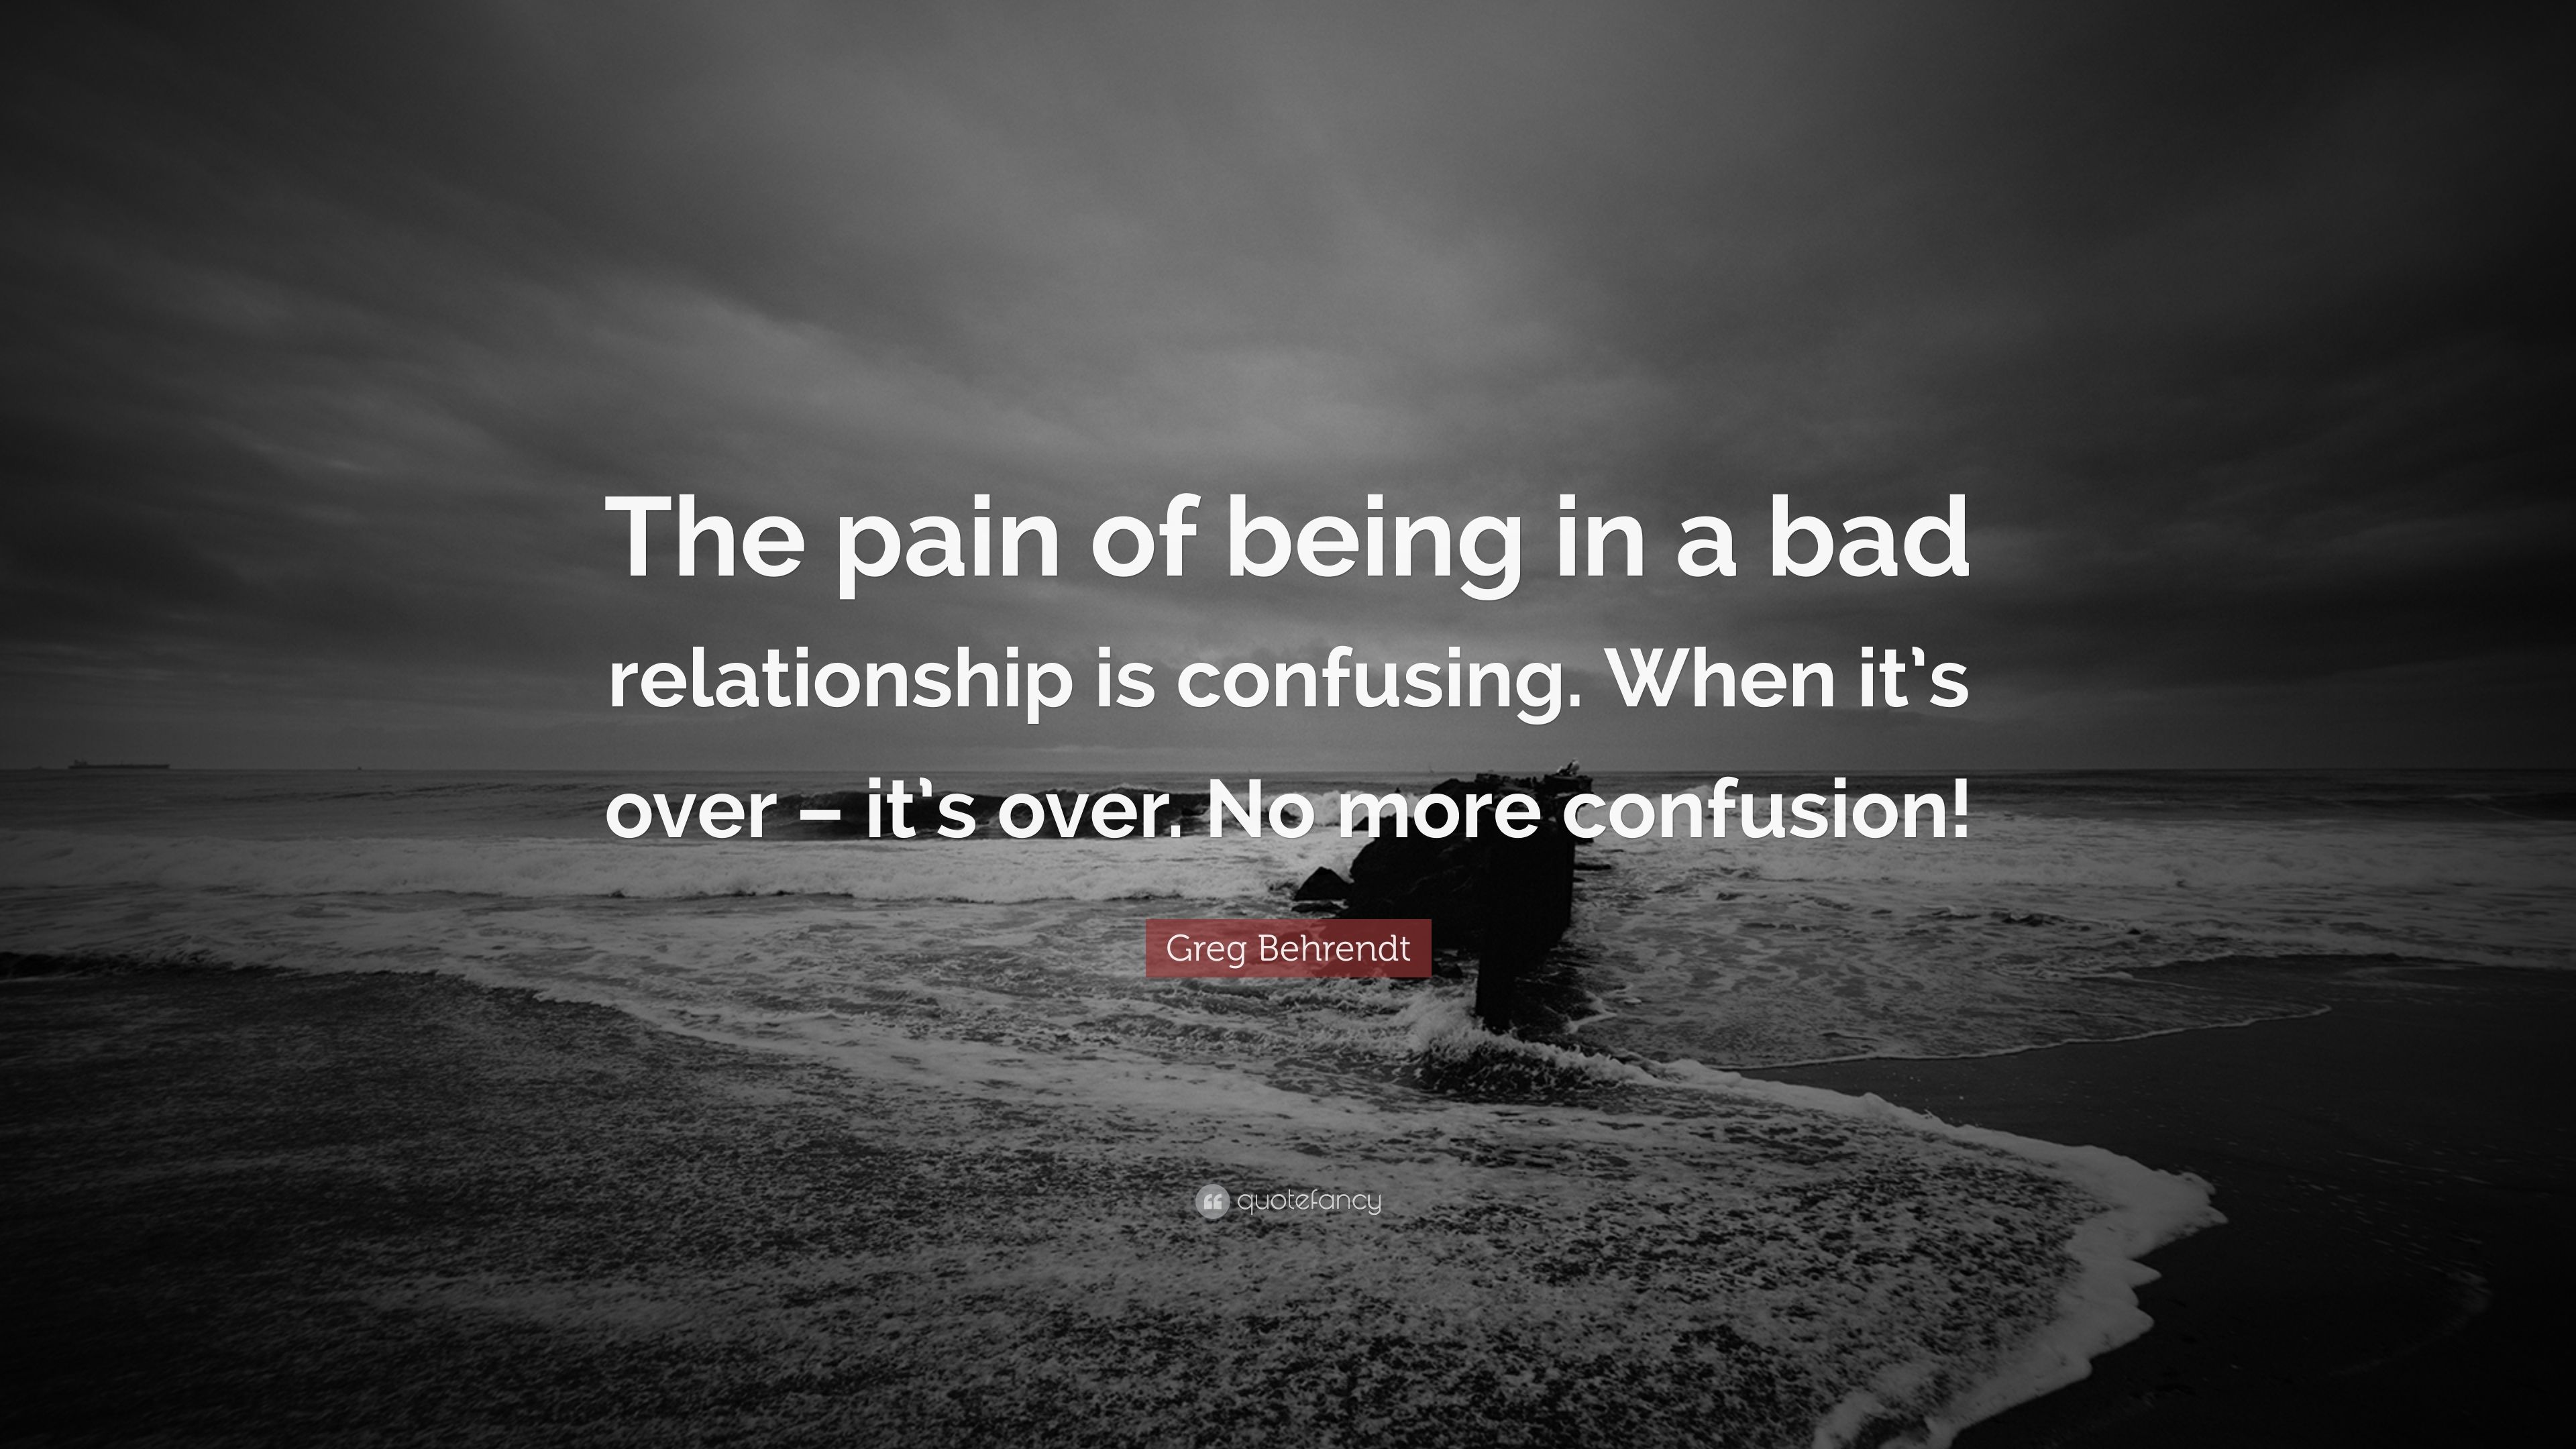 Greg Behrendt Quote: “The pain of being in a bad relationship is confusing. When it's over